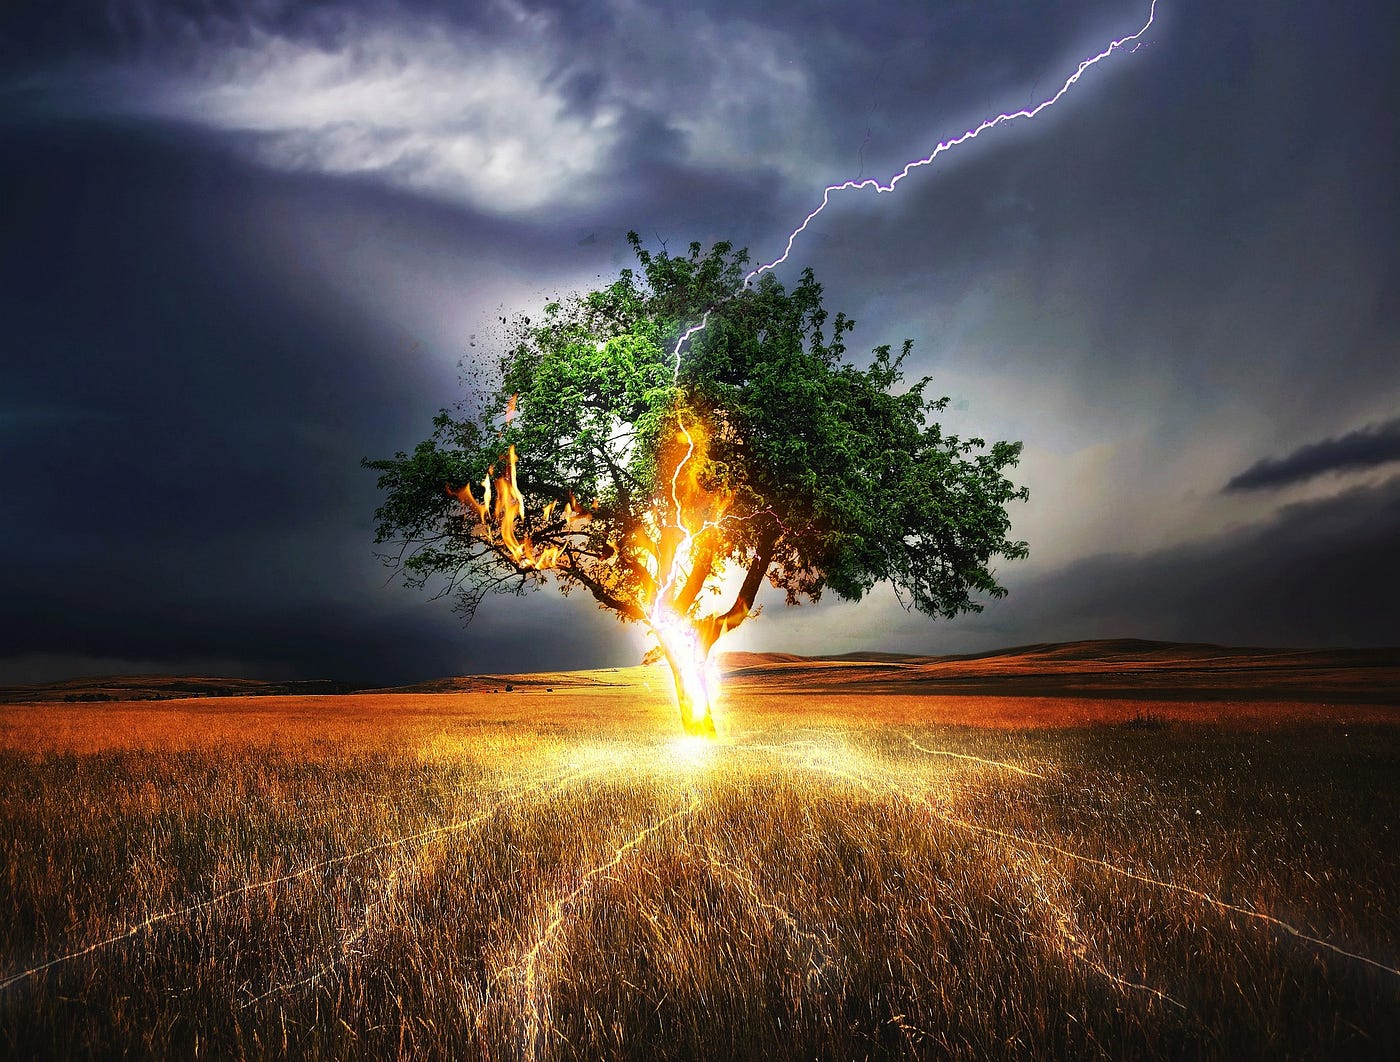 Lightning strikes a tree, lighting it up with fire.